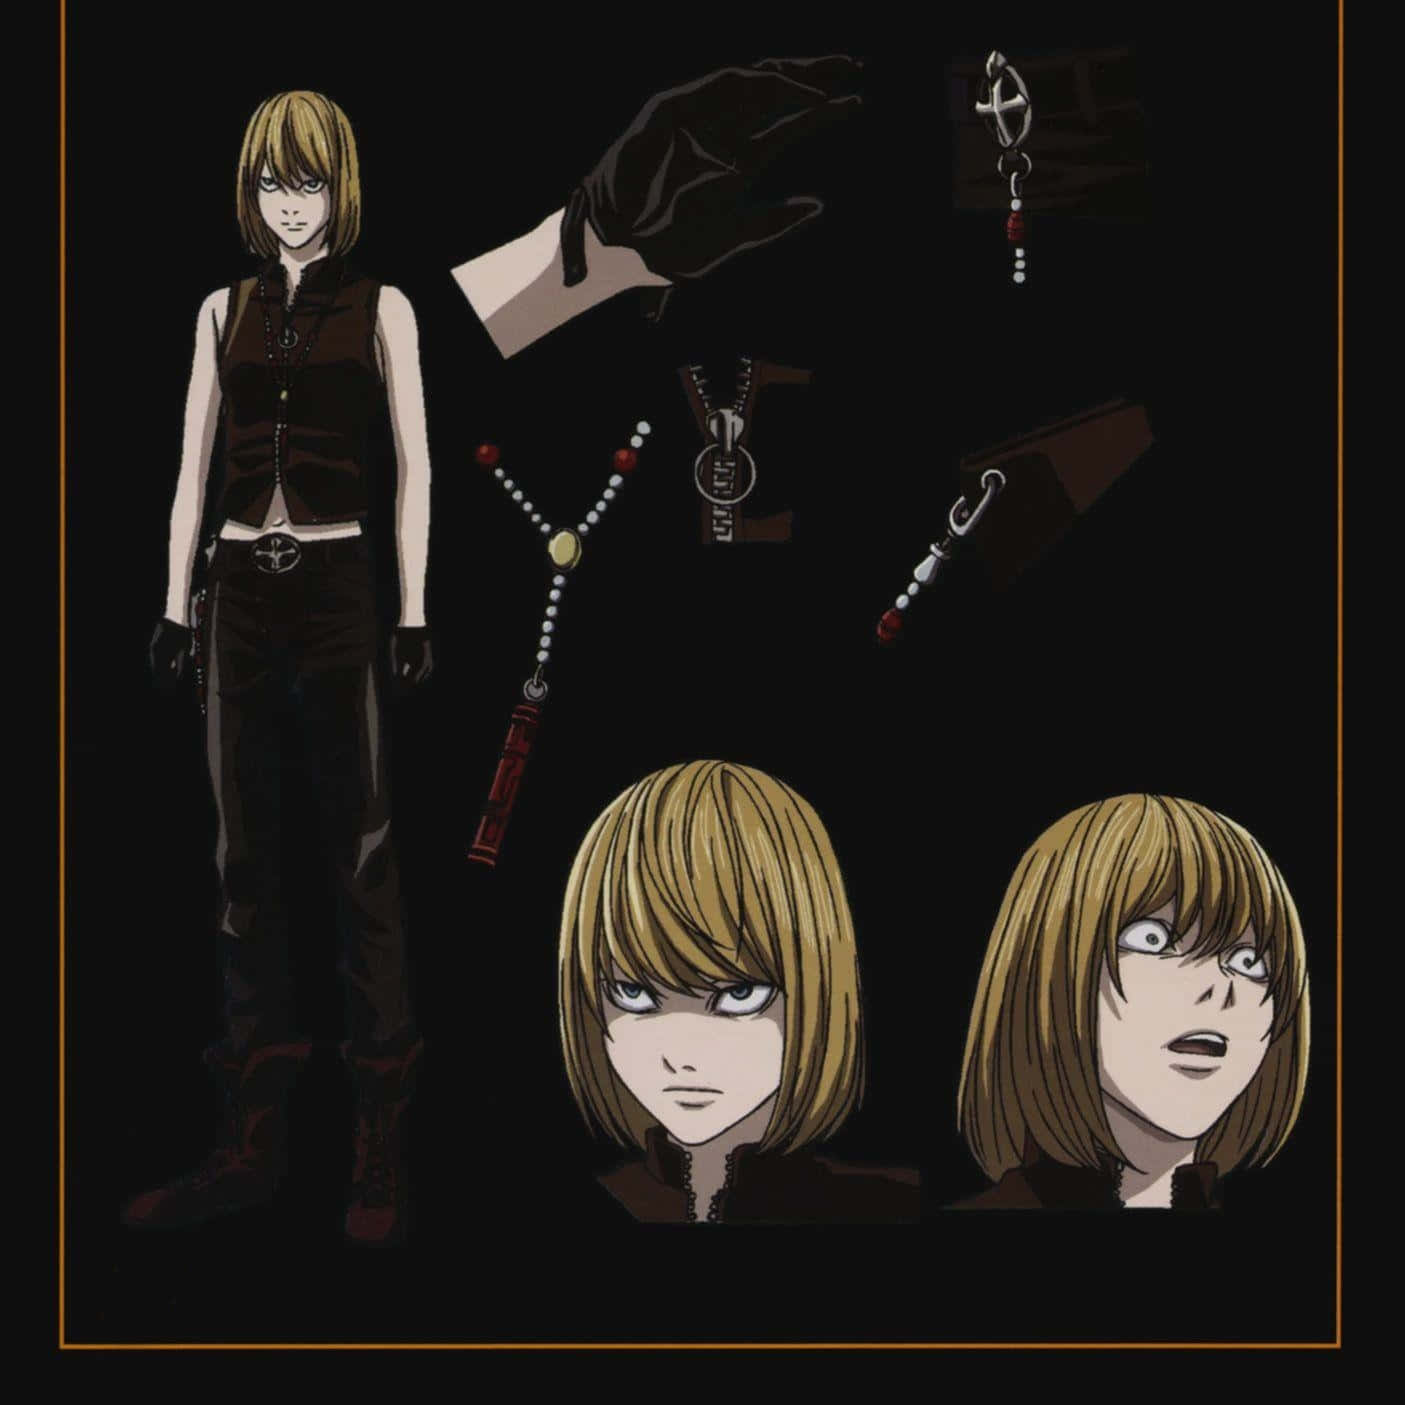 Intense Mello from Death Note Wallpaper